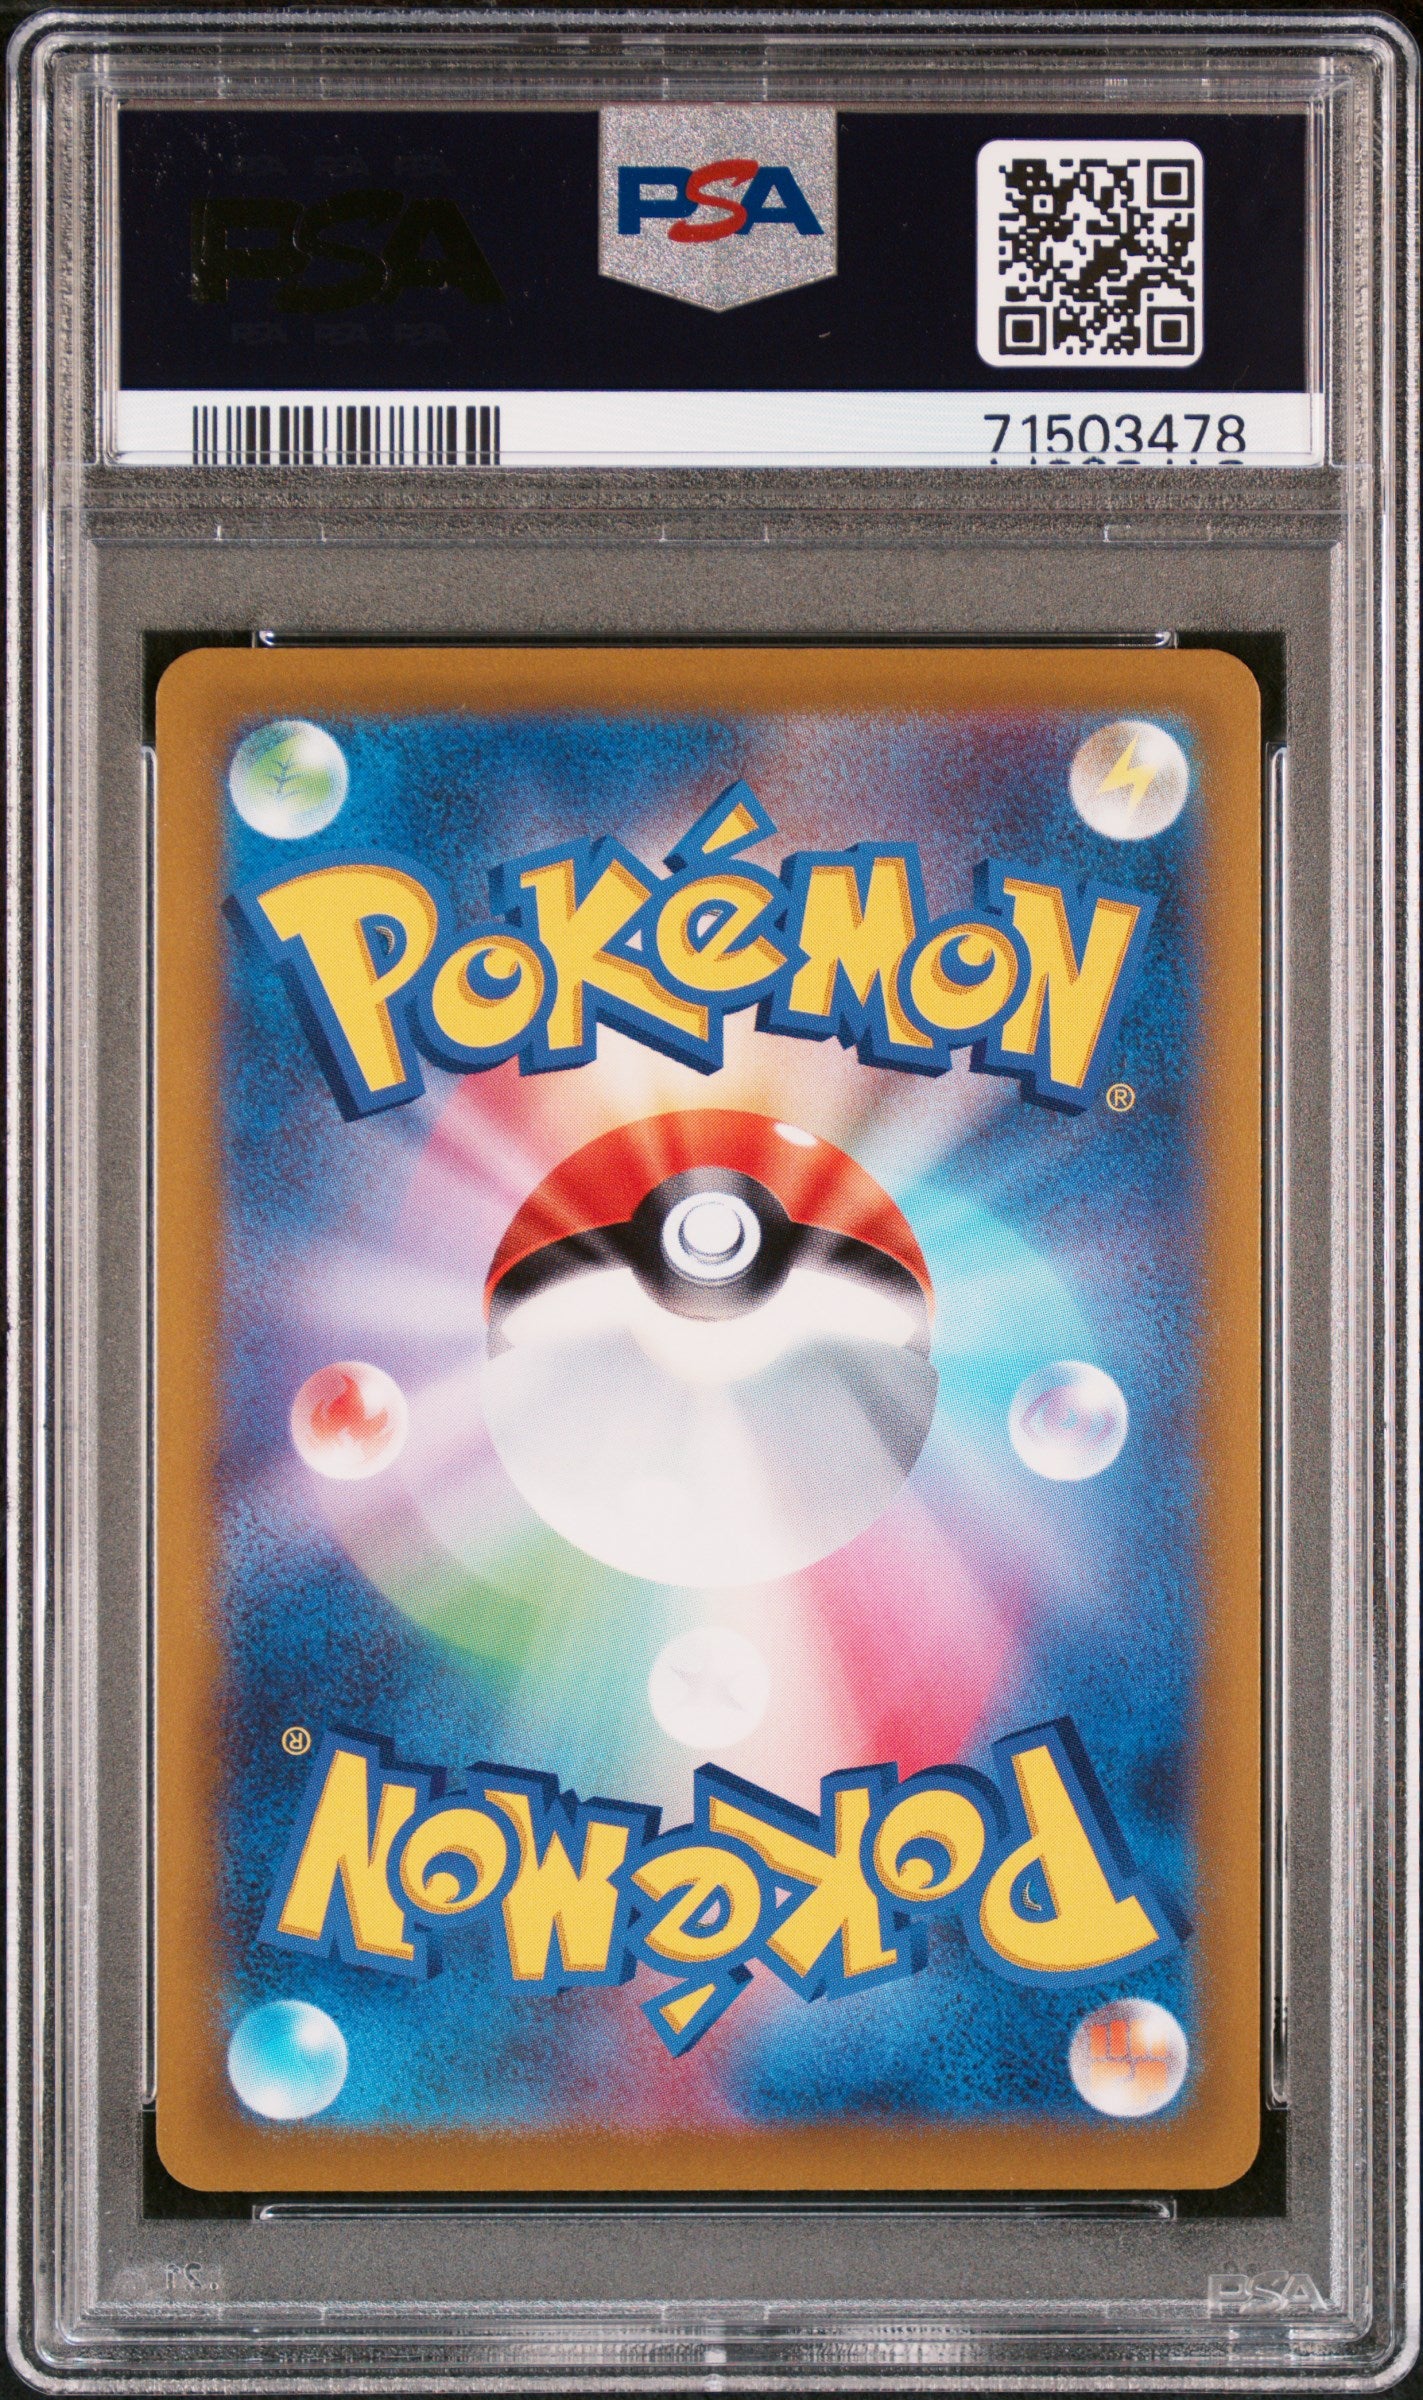 Glaceon V 077/069 (PSA 10, Japanese s6a- Eevee Heroes)